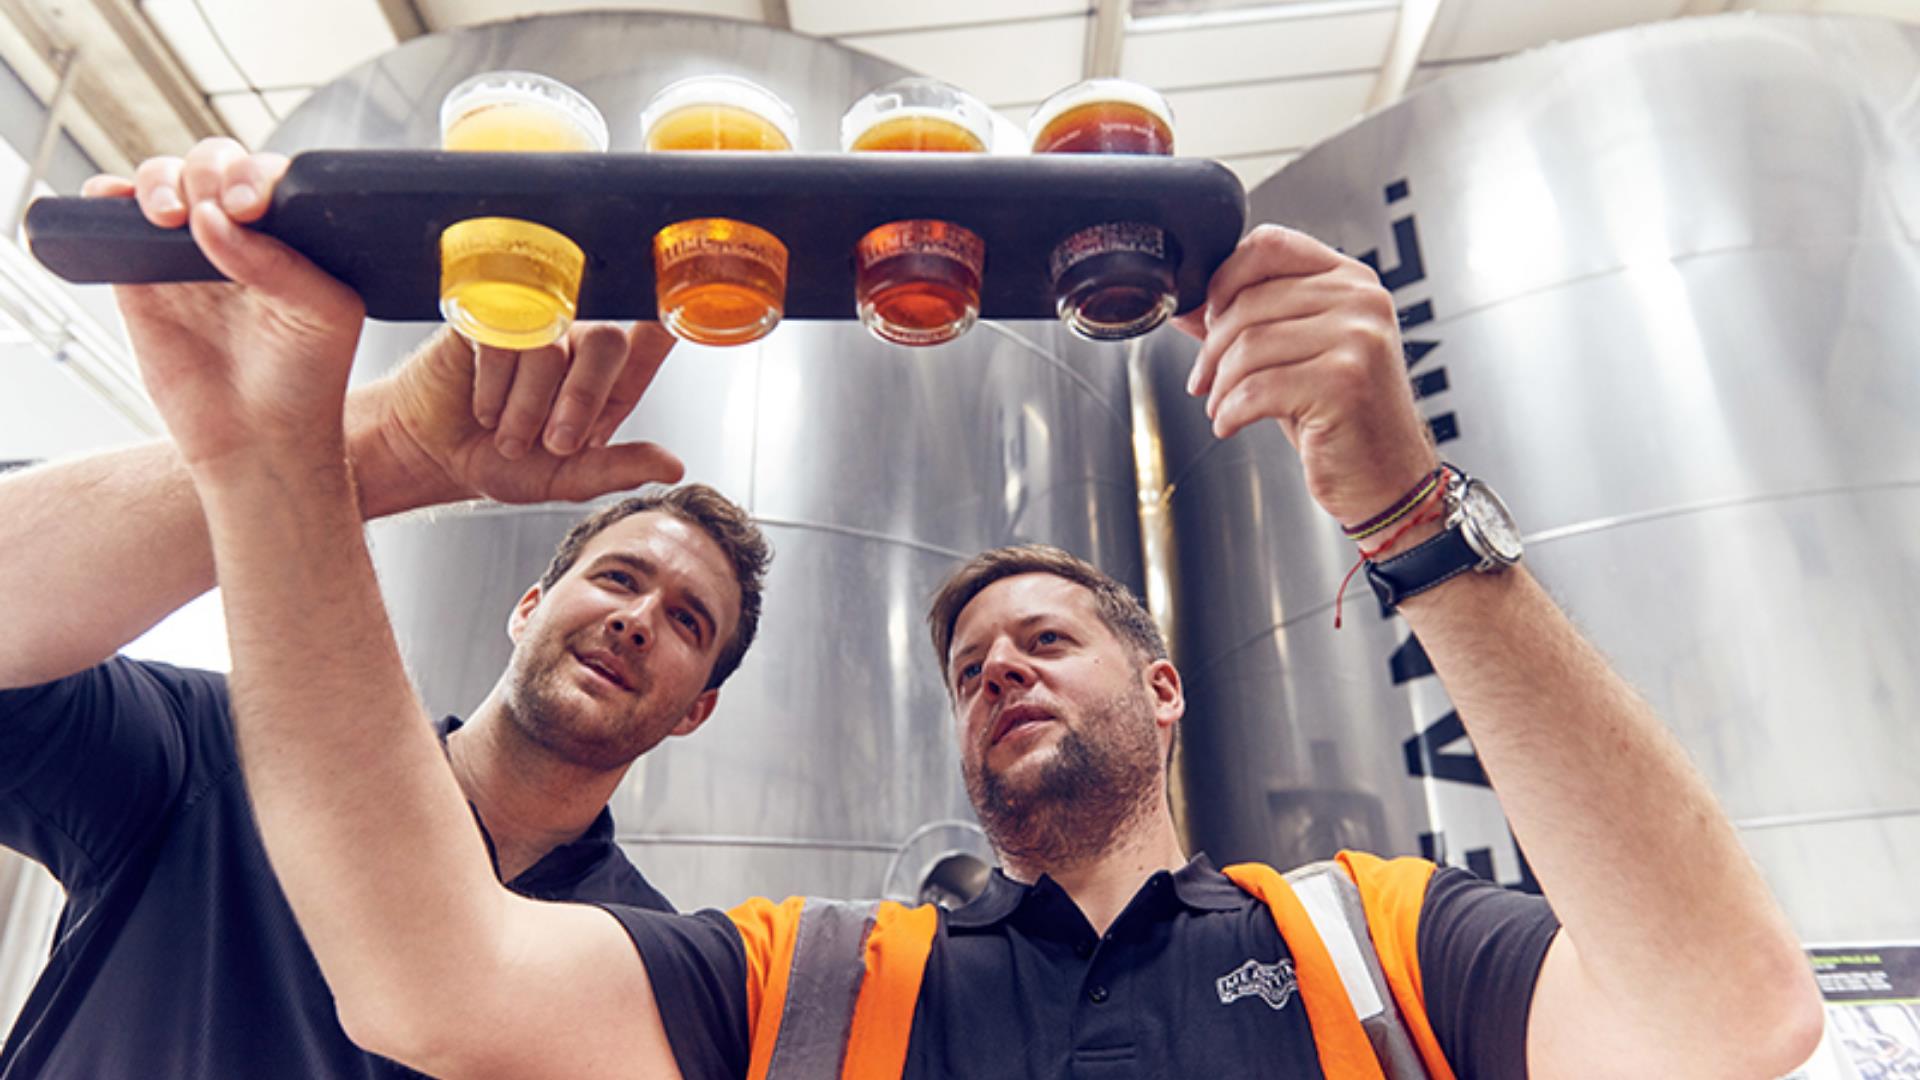 Brewers check the latest batch of brews at Meantime Brewery on Greenwich Peninsula.